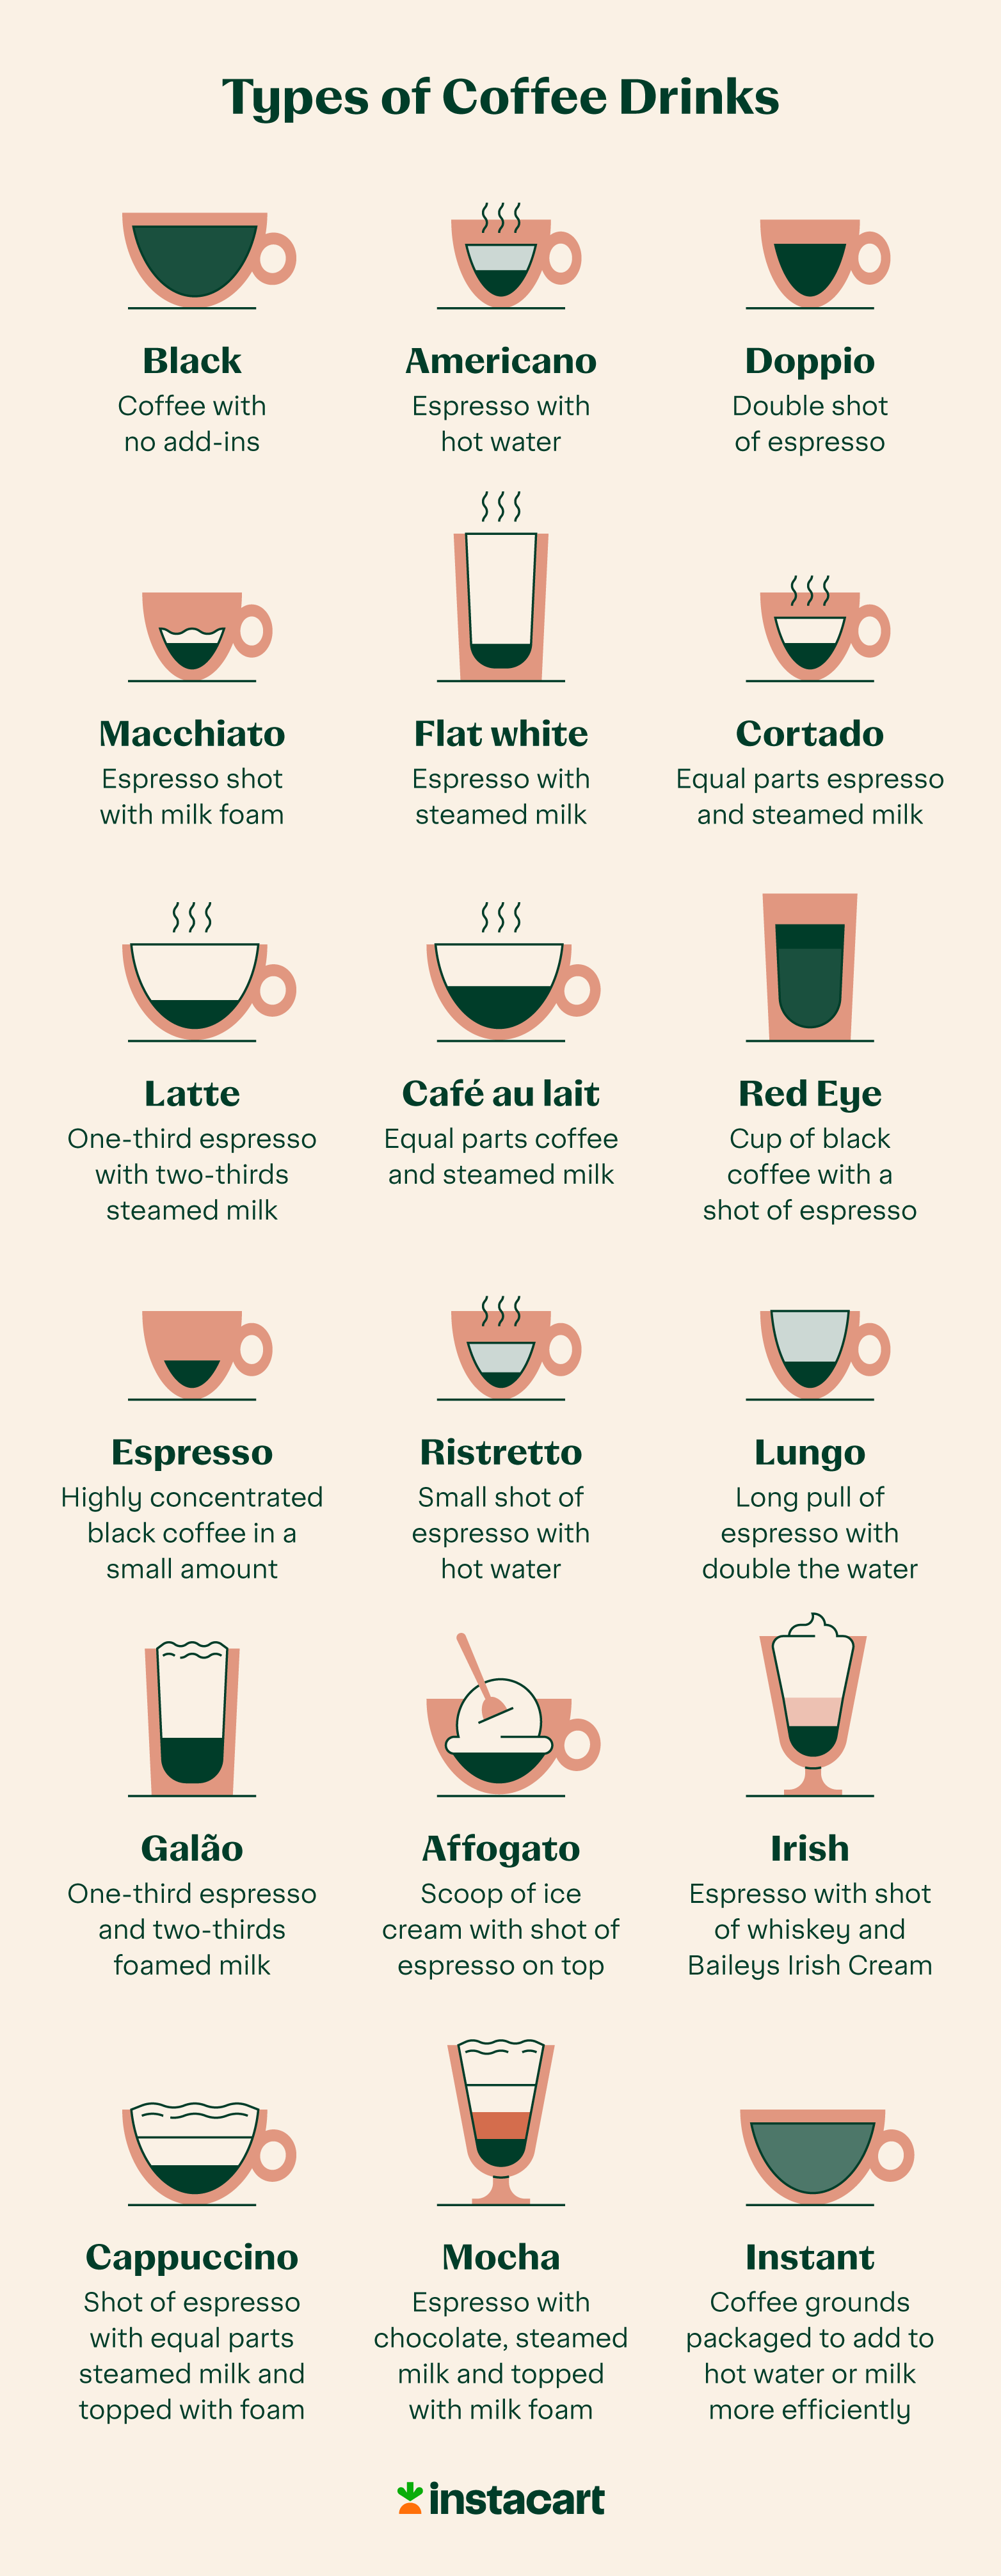 https://www.instacart.com/company/wp-content/uploads/2022/08/types-of-coffee-drinks.png